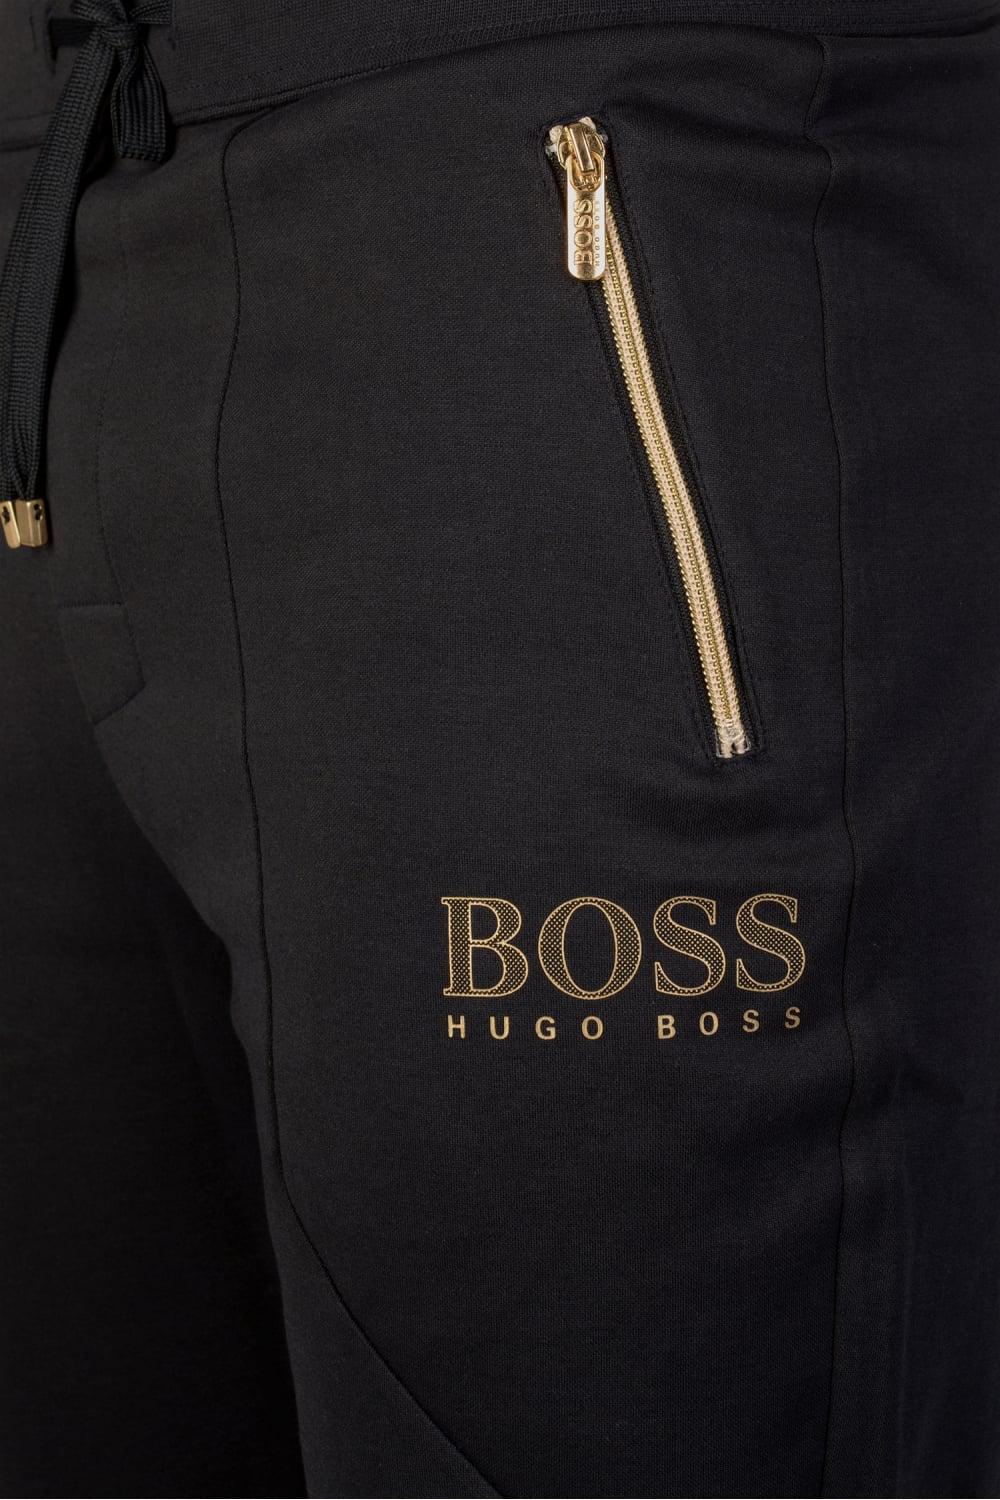 hugo boss black and gold tracksuit bottoms